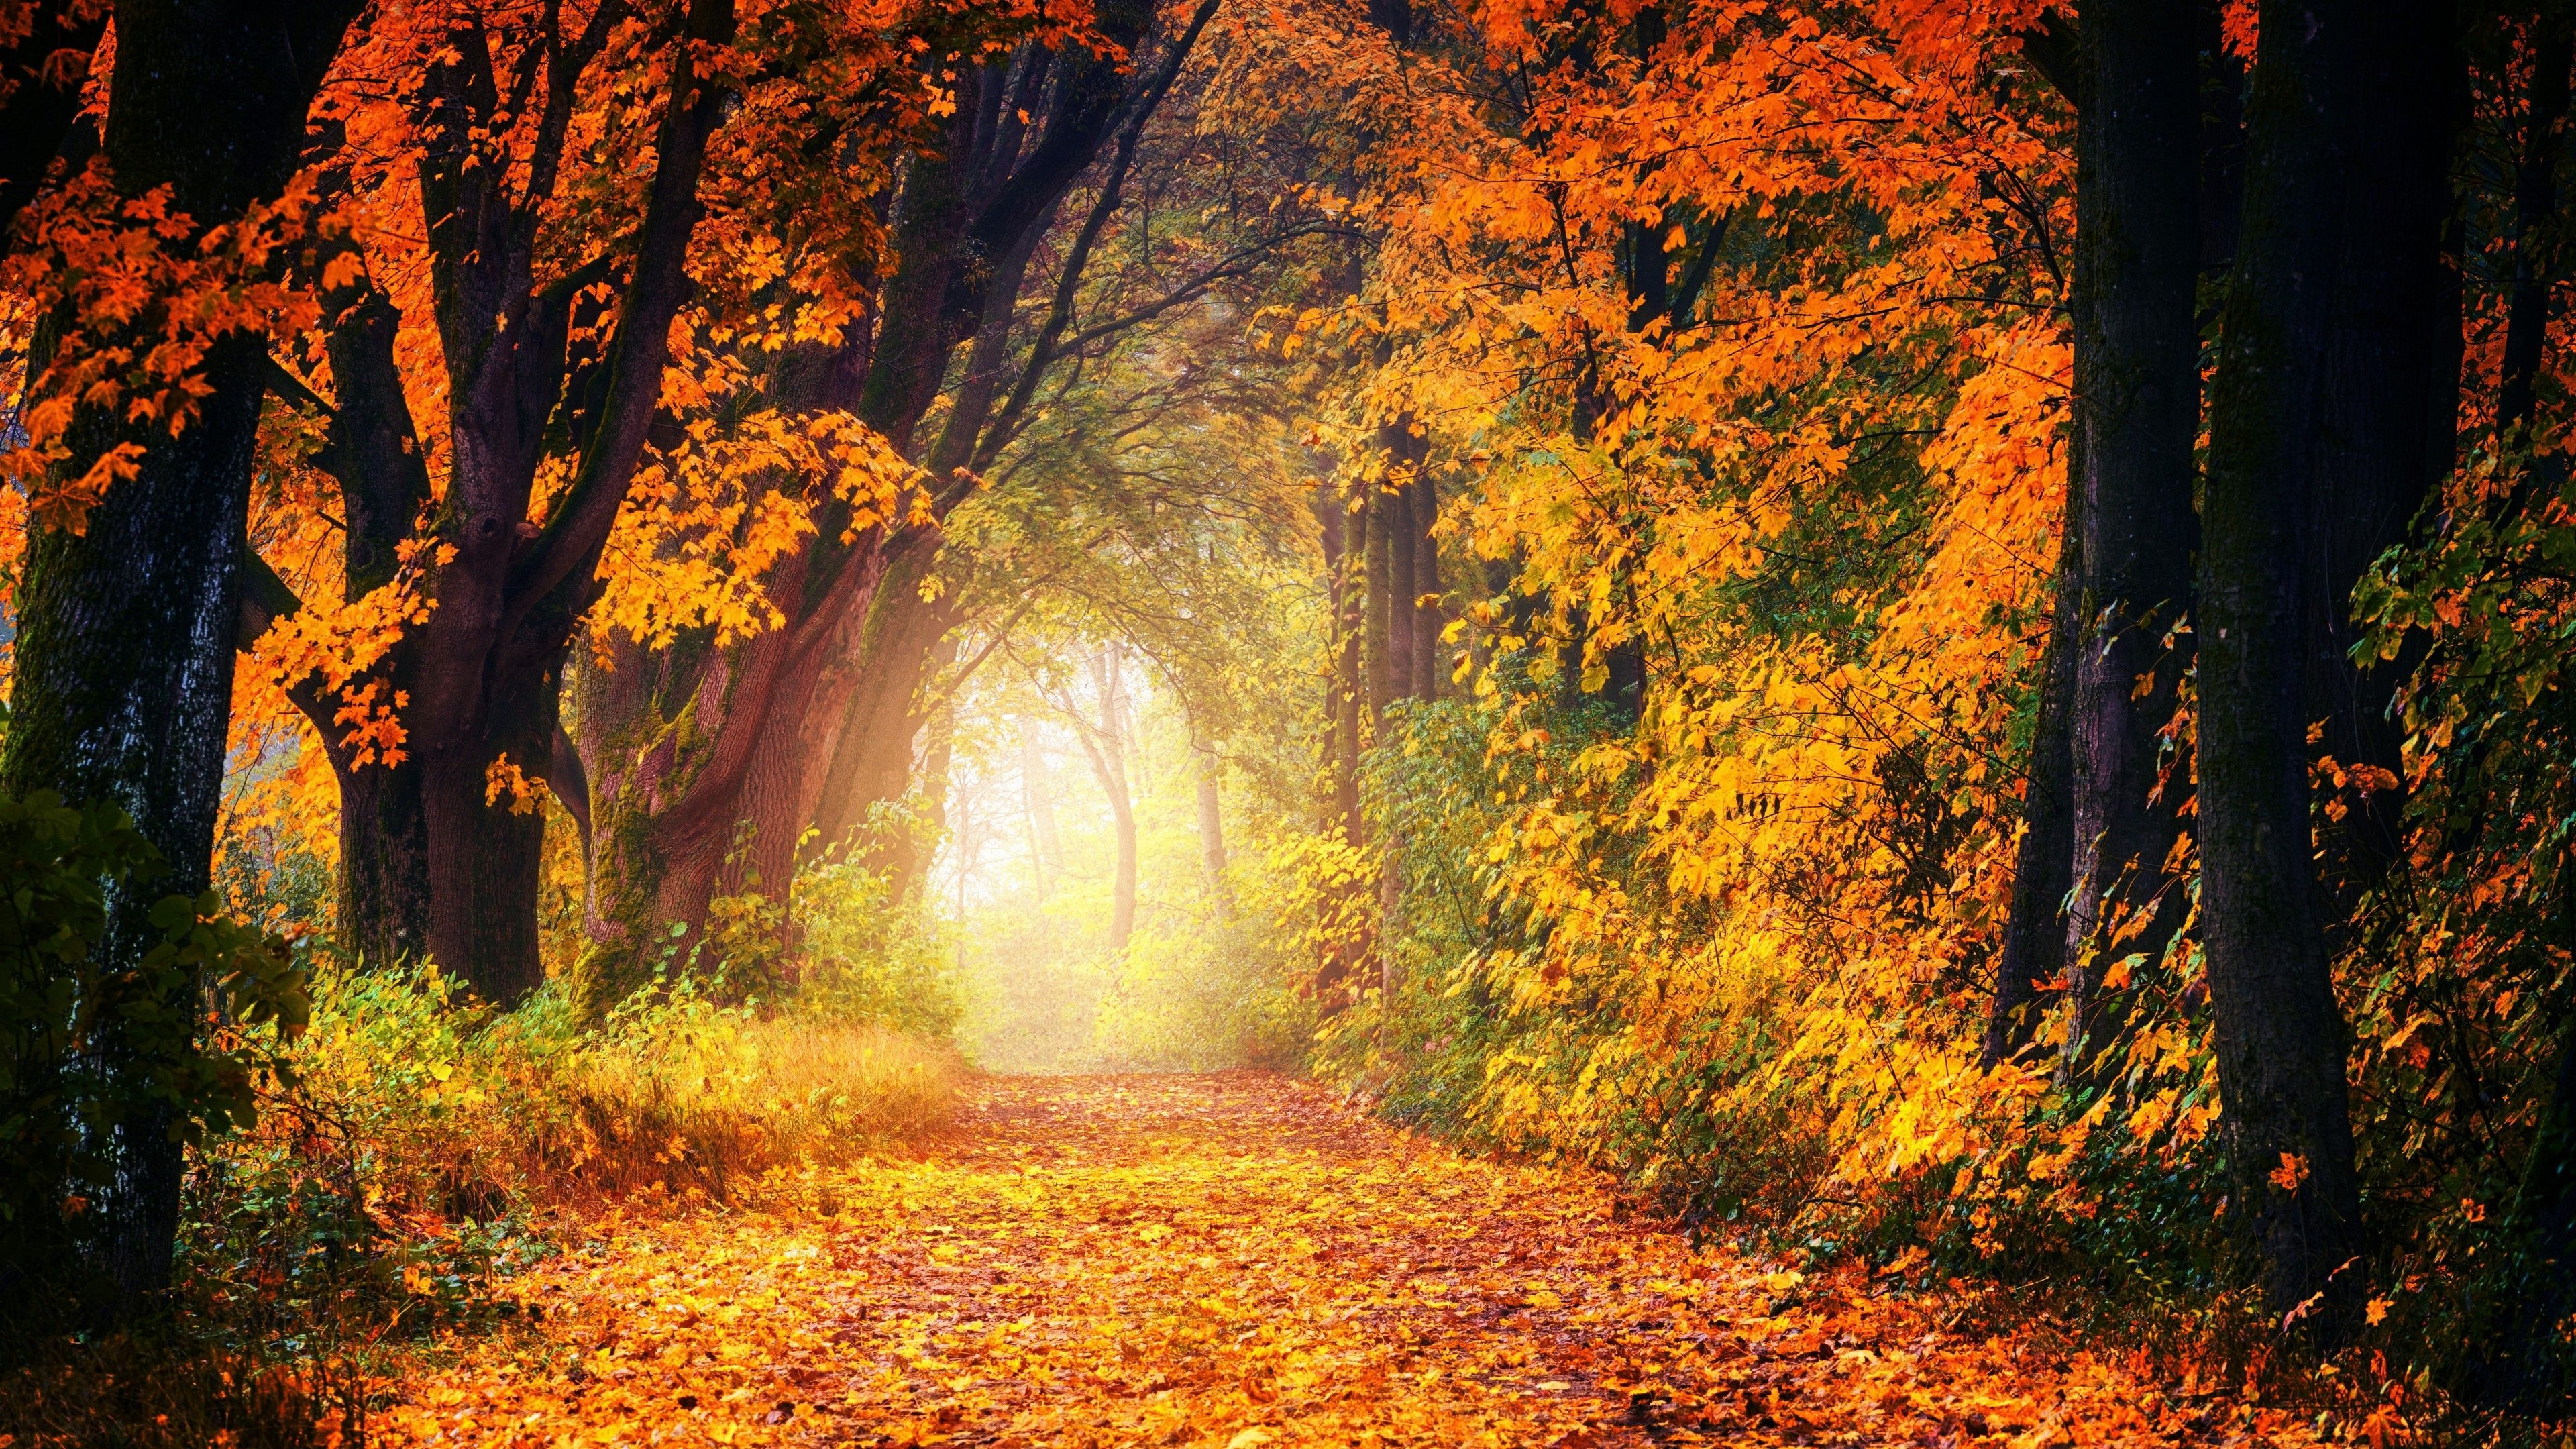 Download 3840x2160 Path, Autumn, Fall, Trees, Forest, Scenery, Cozy Wallpaper for UHD TV